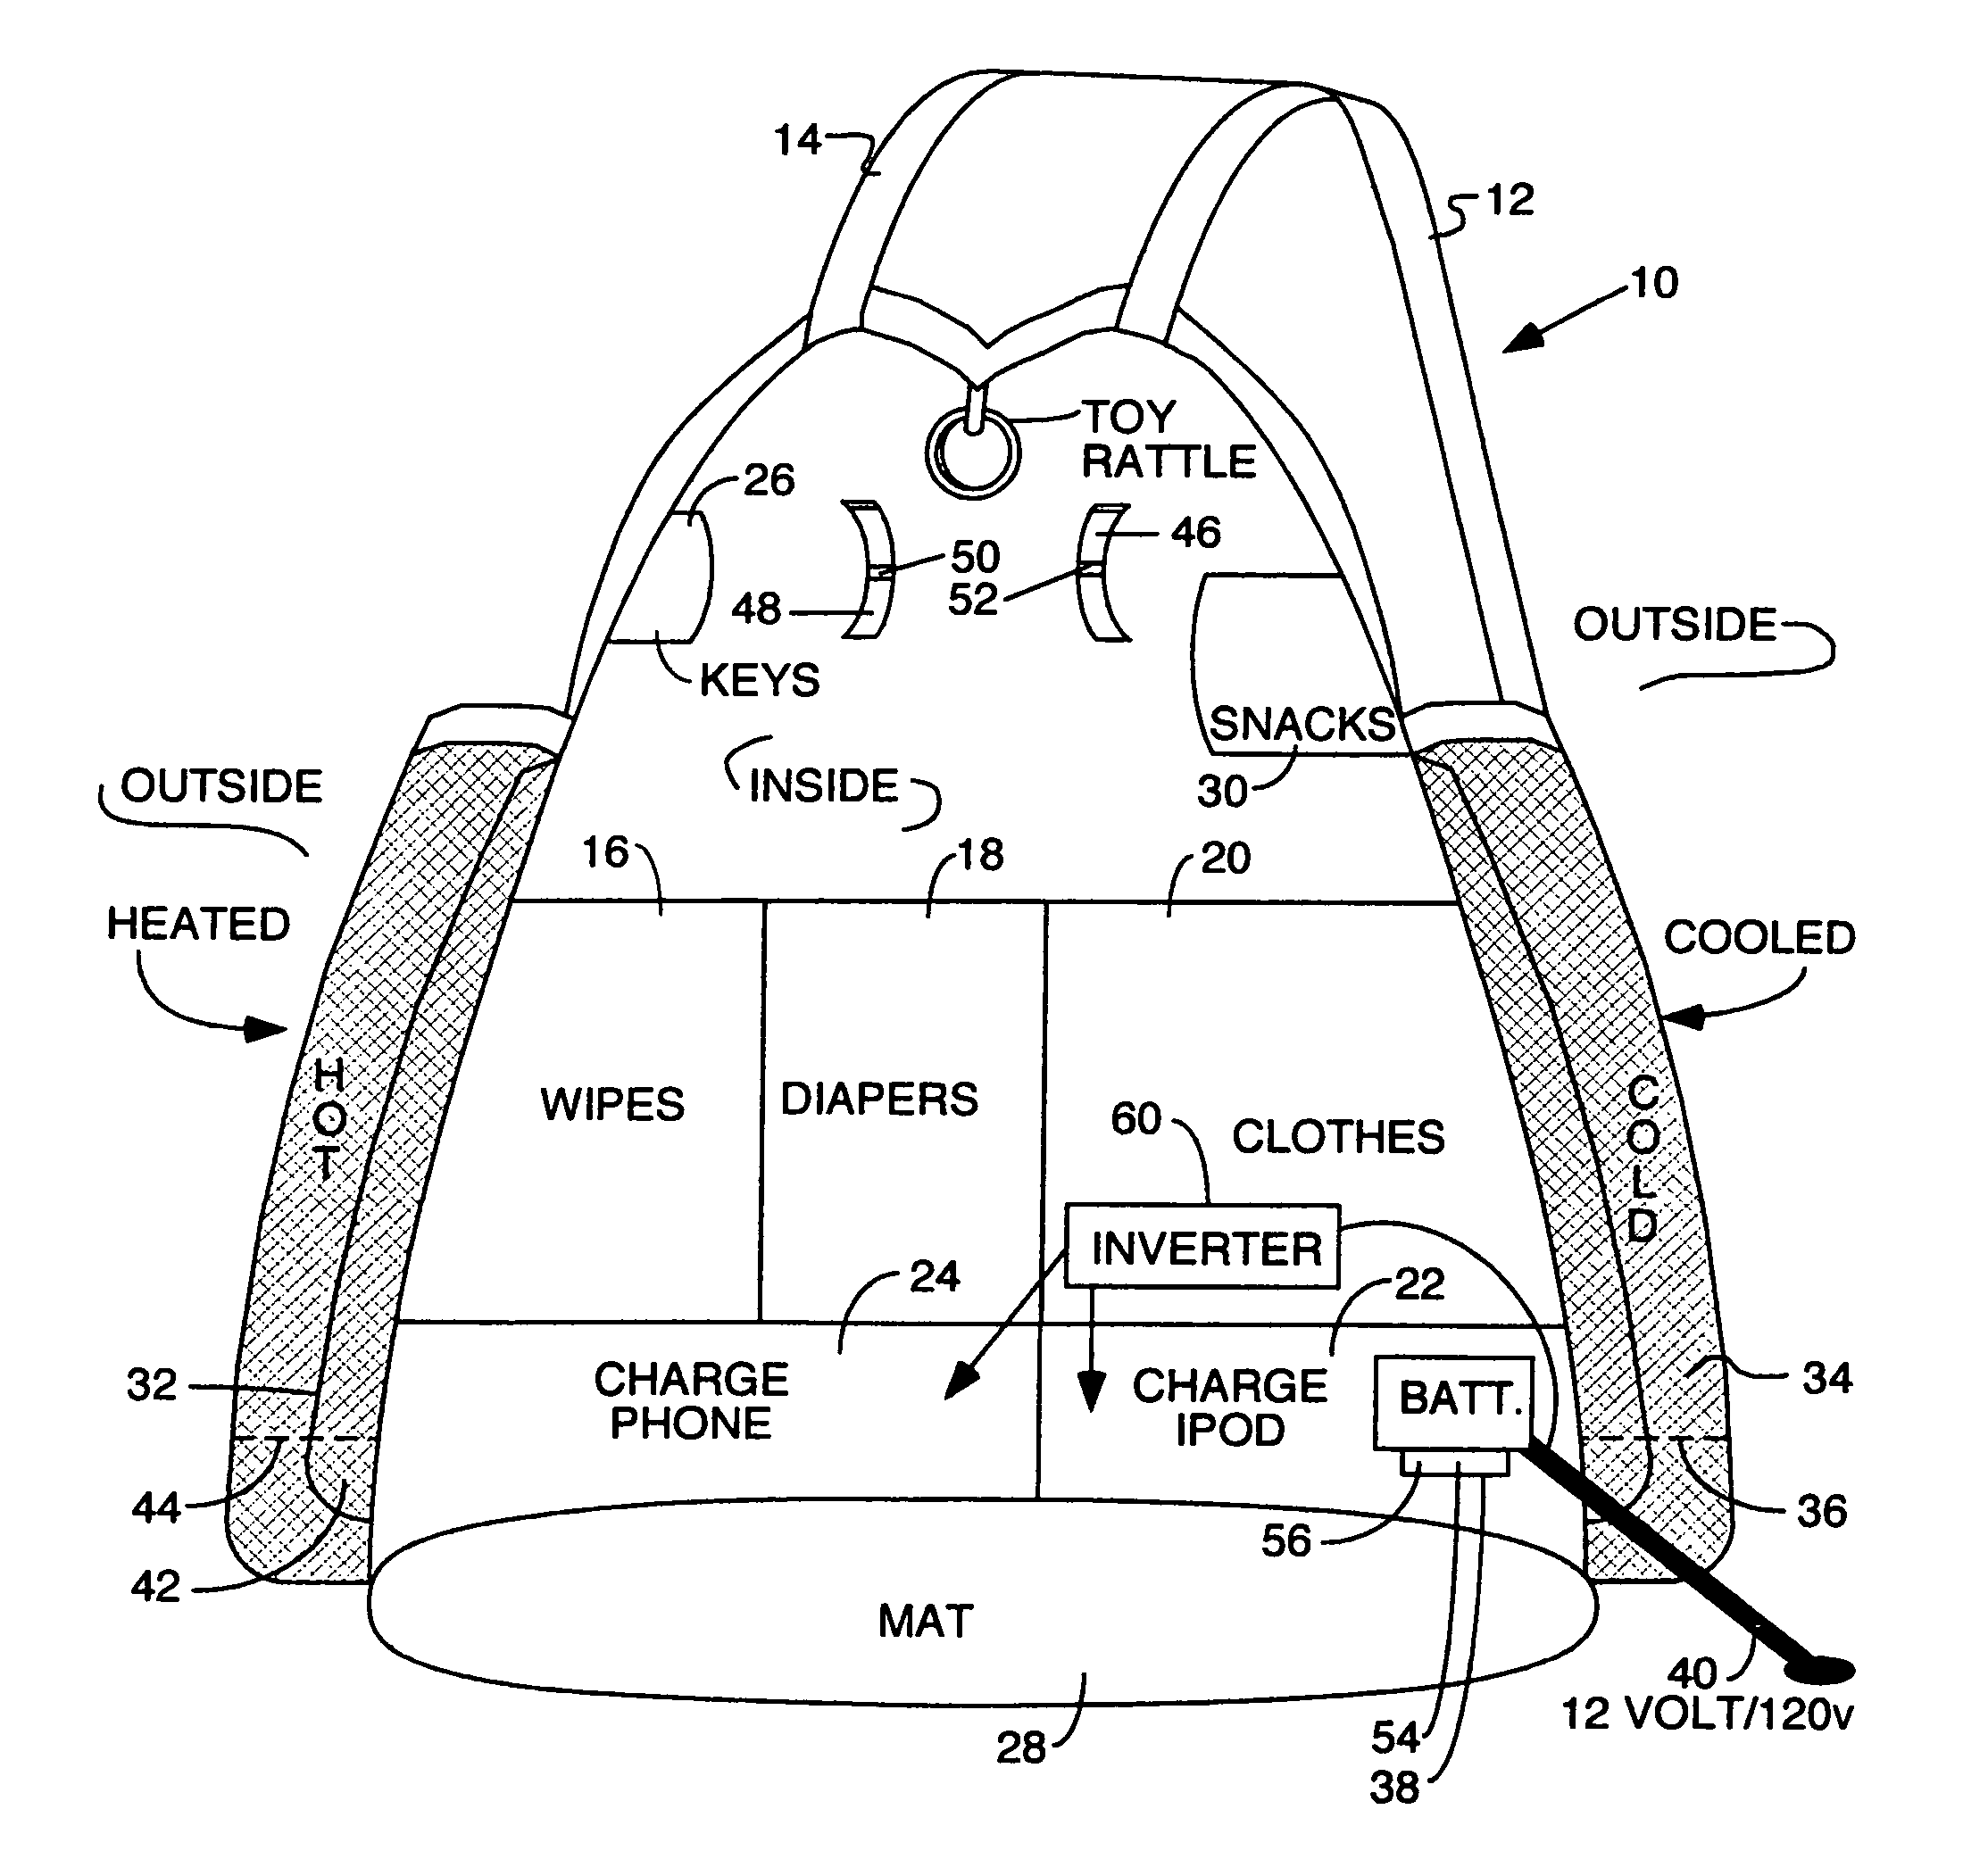 Diaper bag with heated and cooled compartments